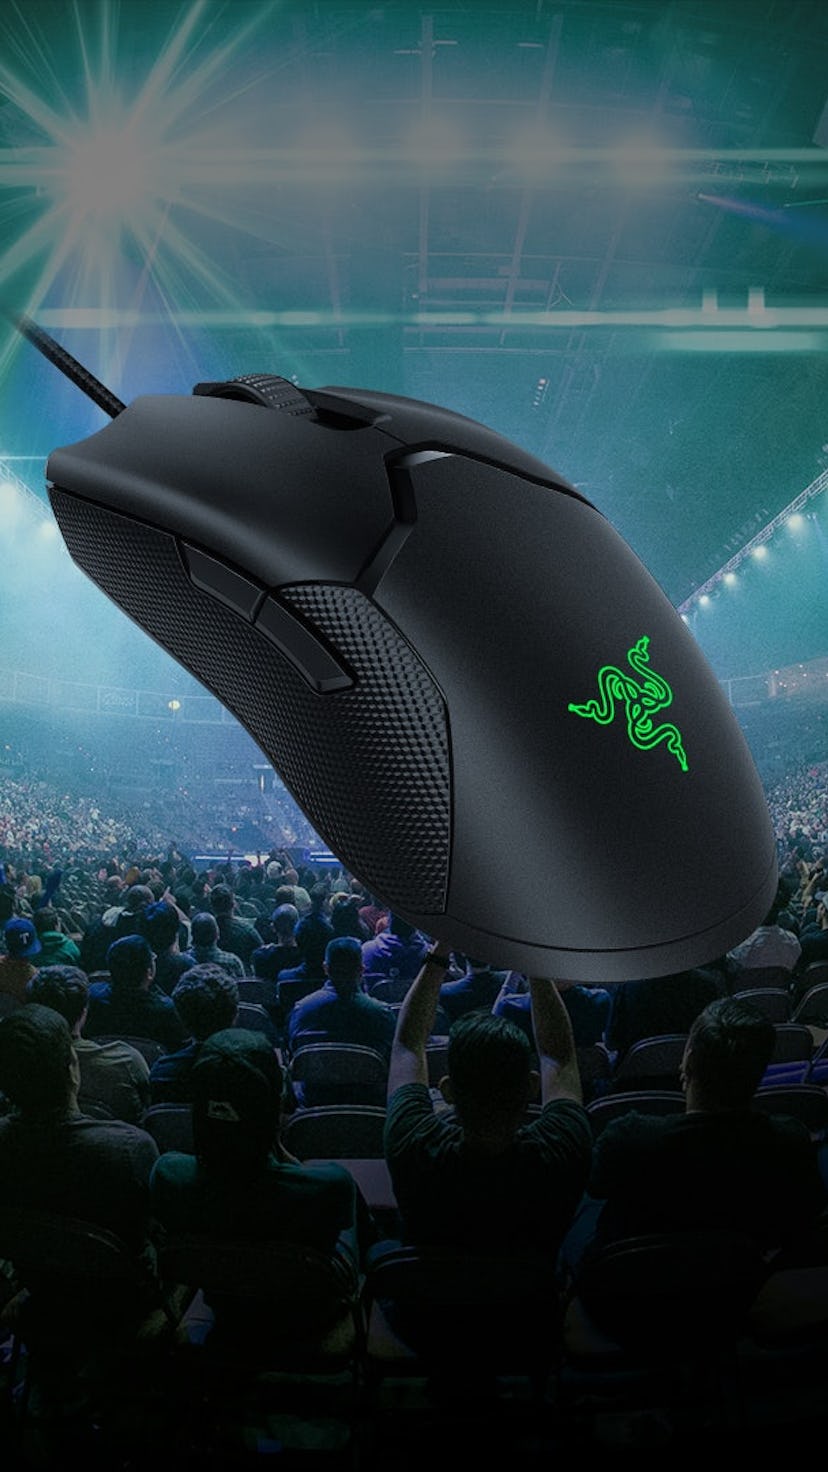 Razer Viper 8K gaming mouse with world's fastest 8000Hz polling rate